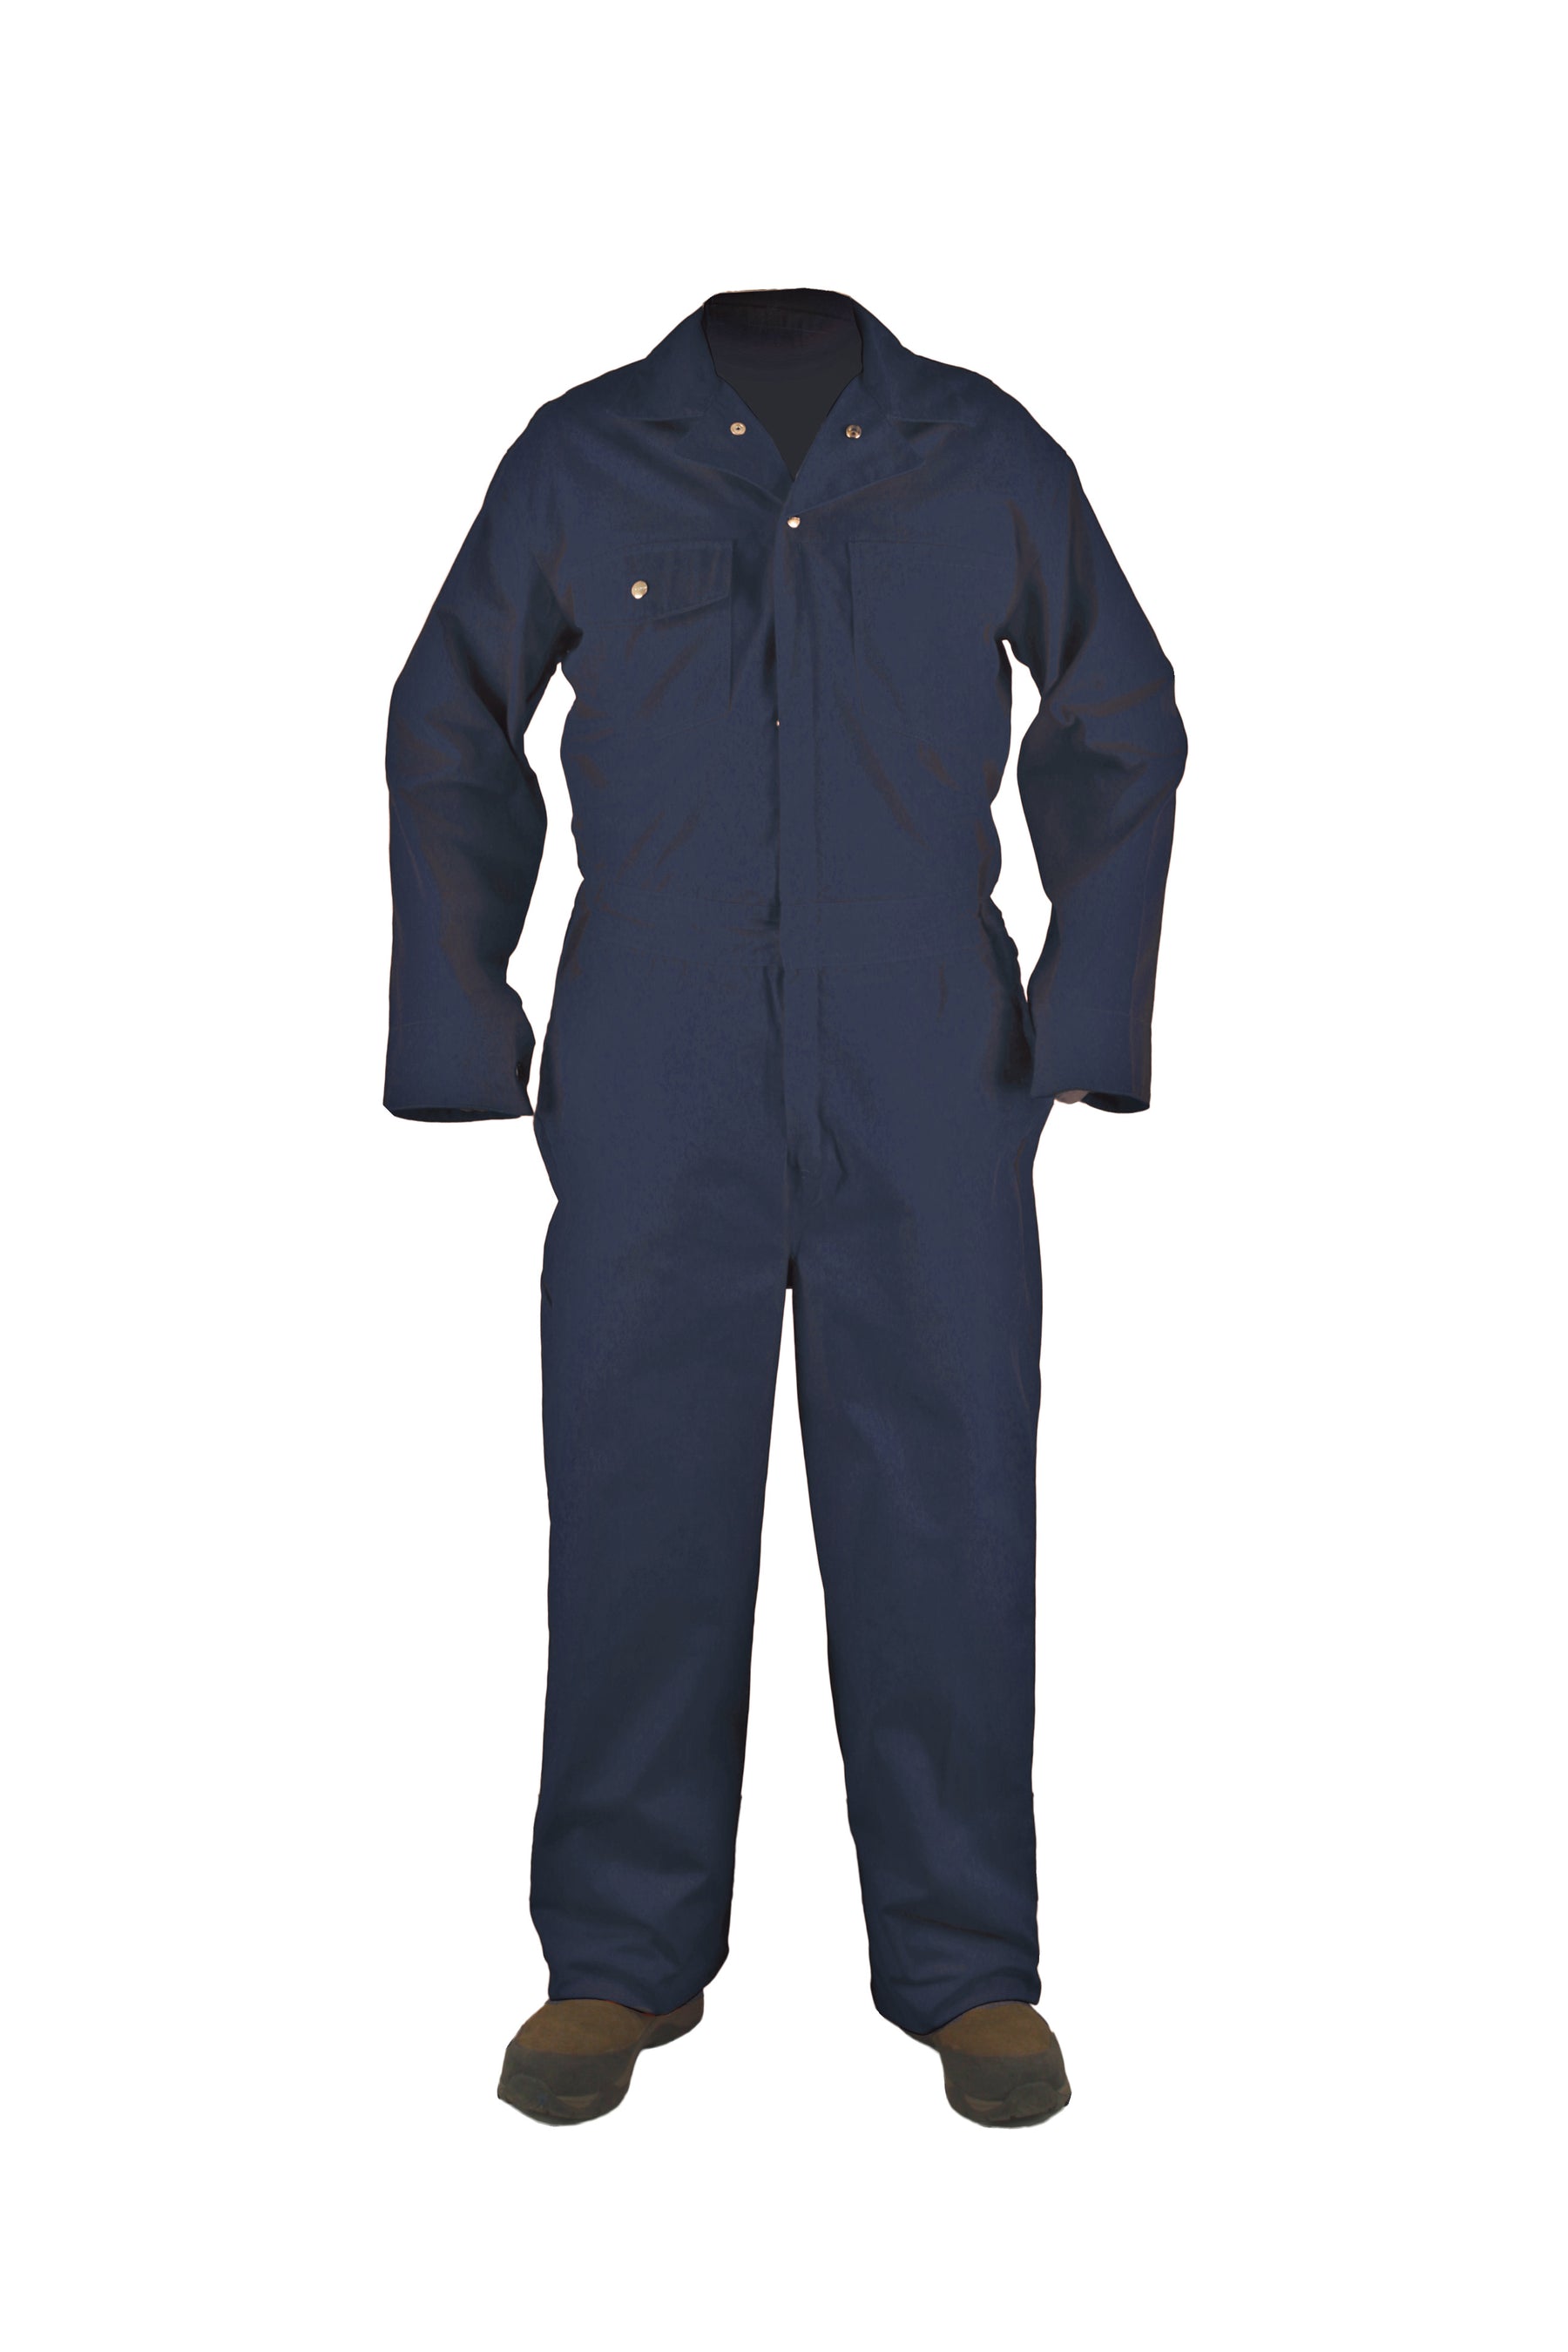 Zip Front Poly/cotton Coverall